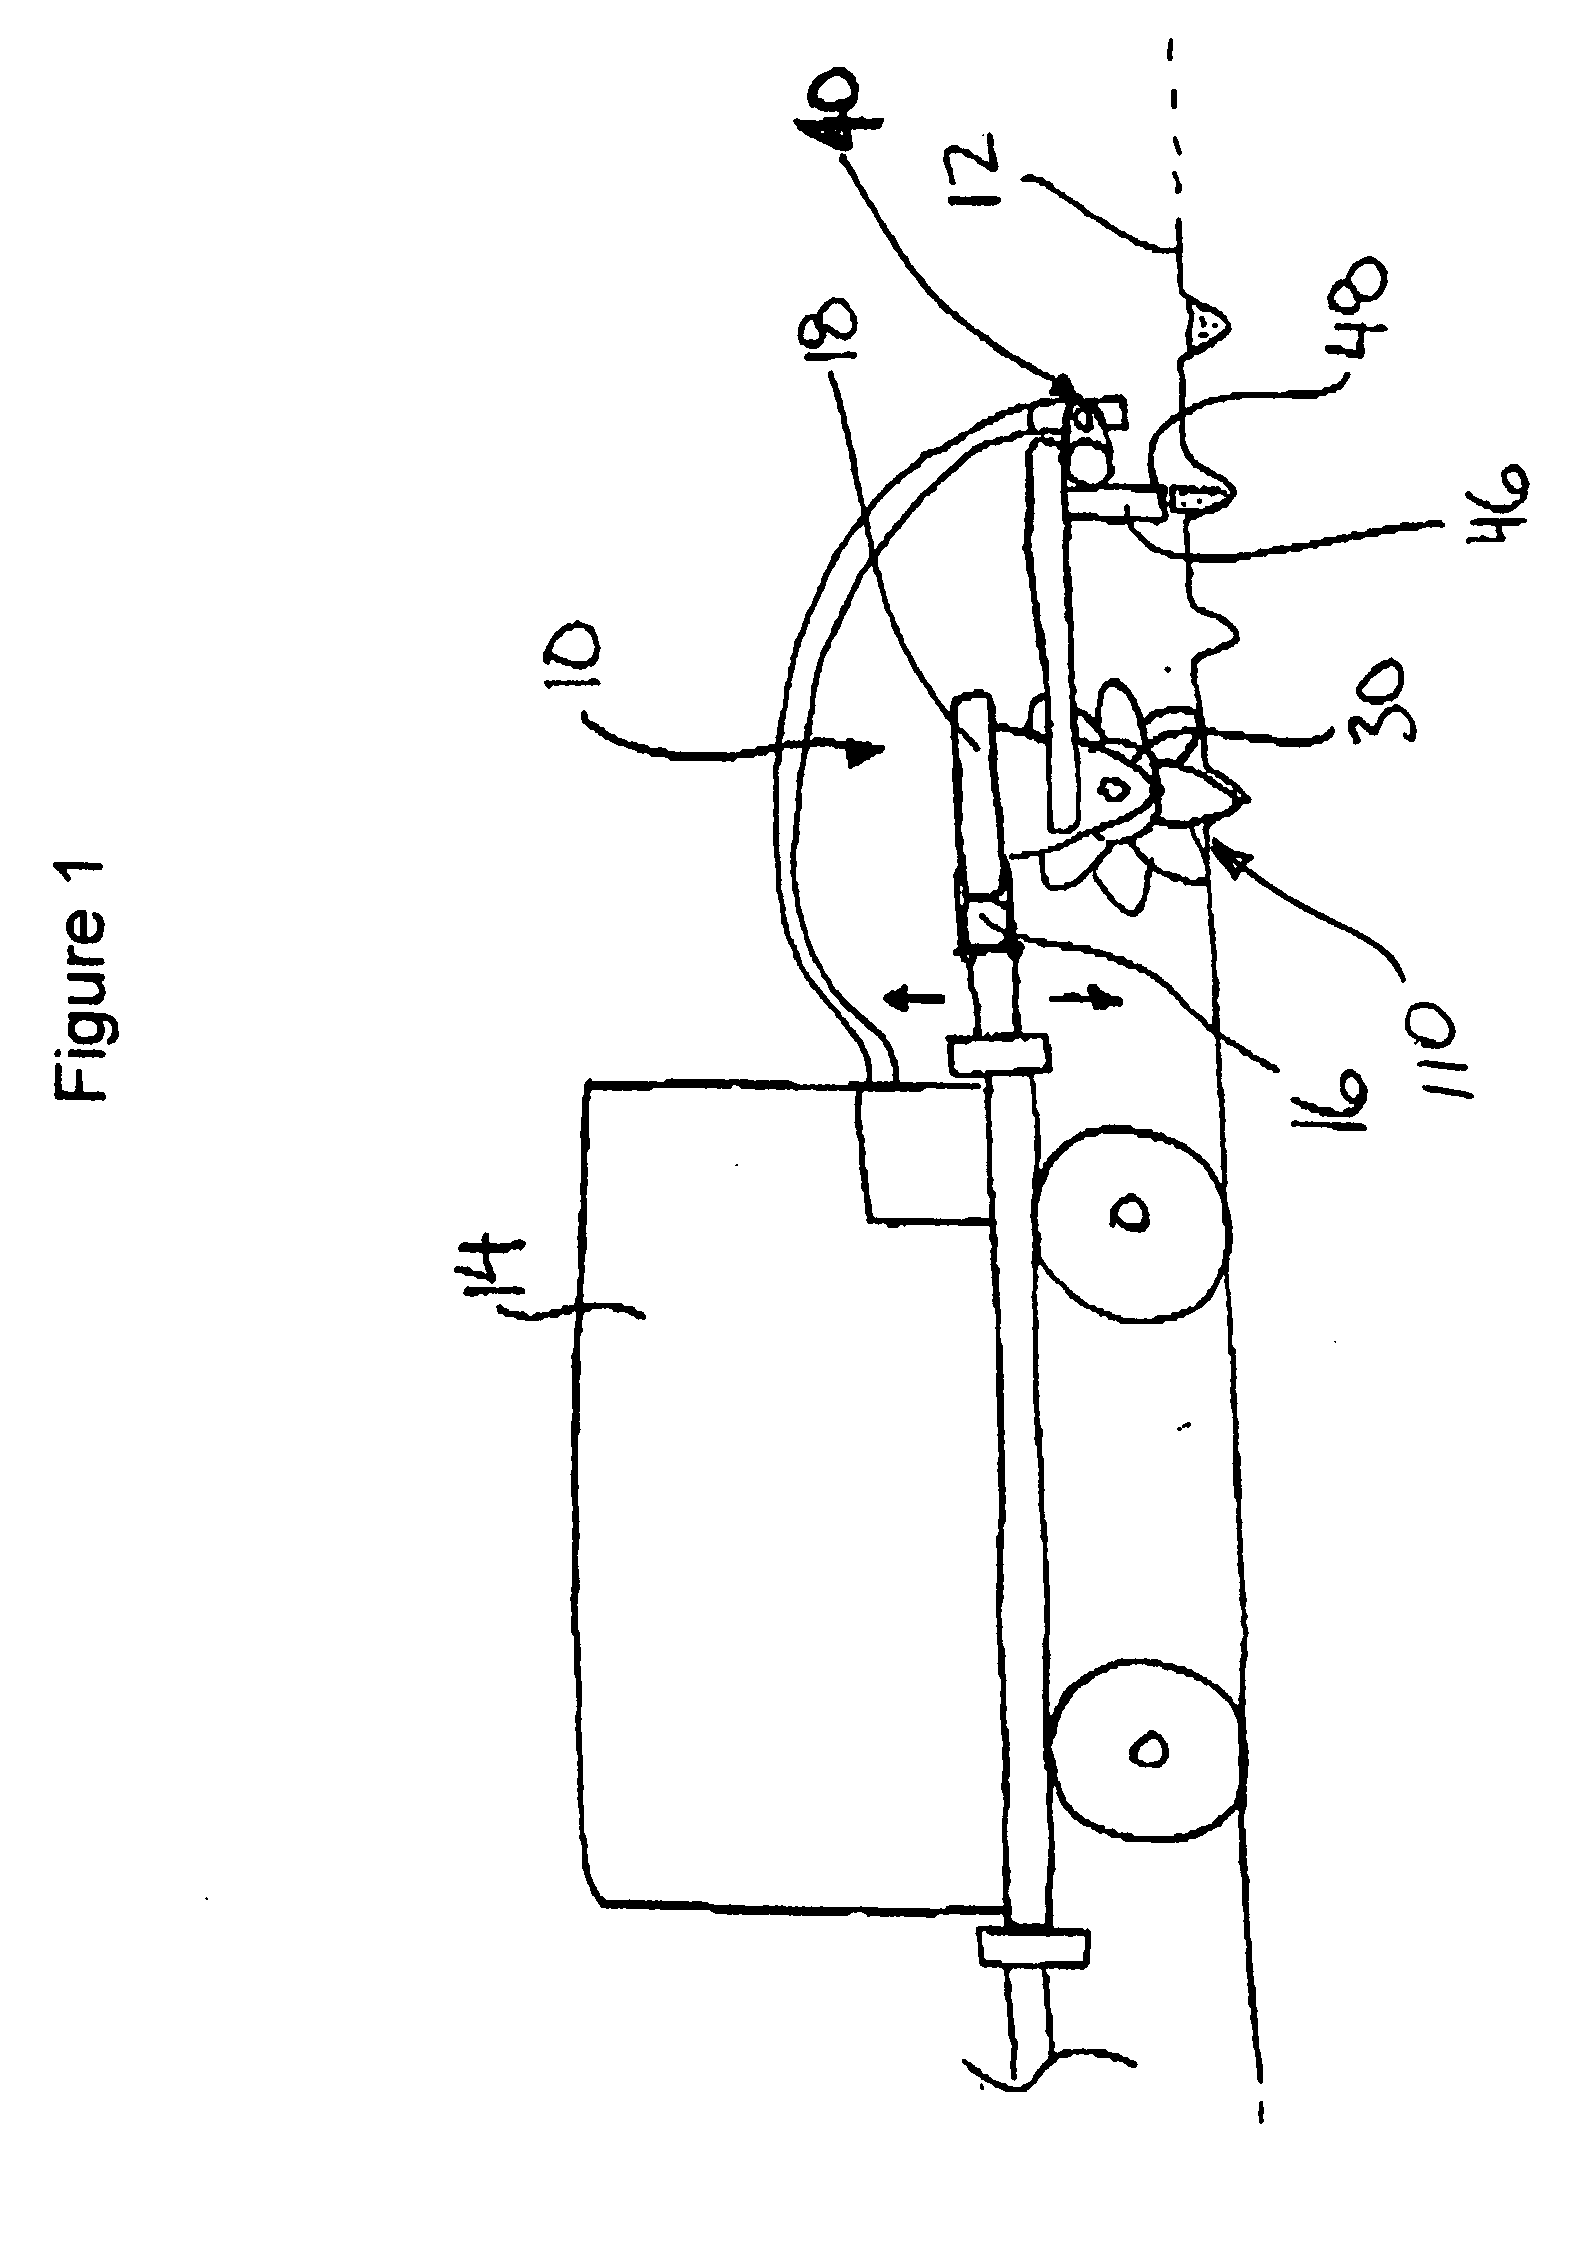 Liquid fertilizer injection method, system, and apparatus